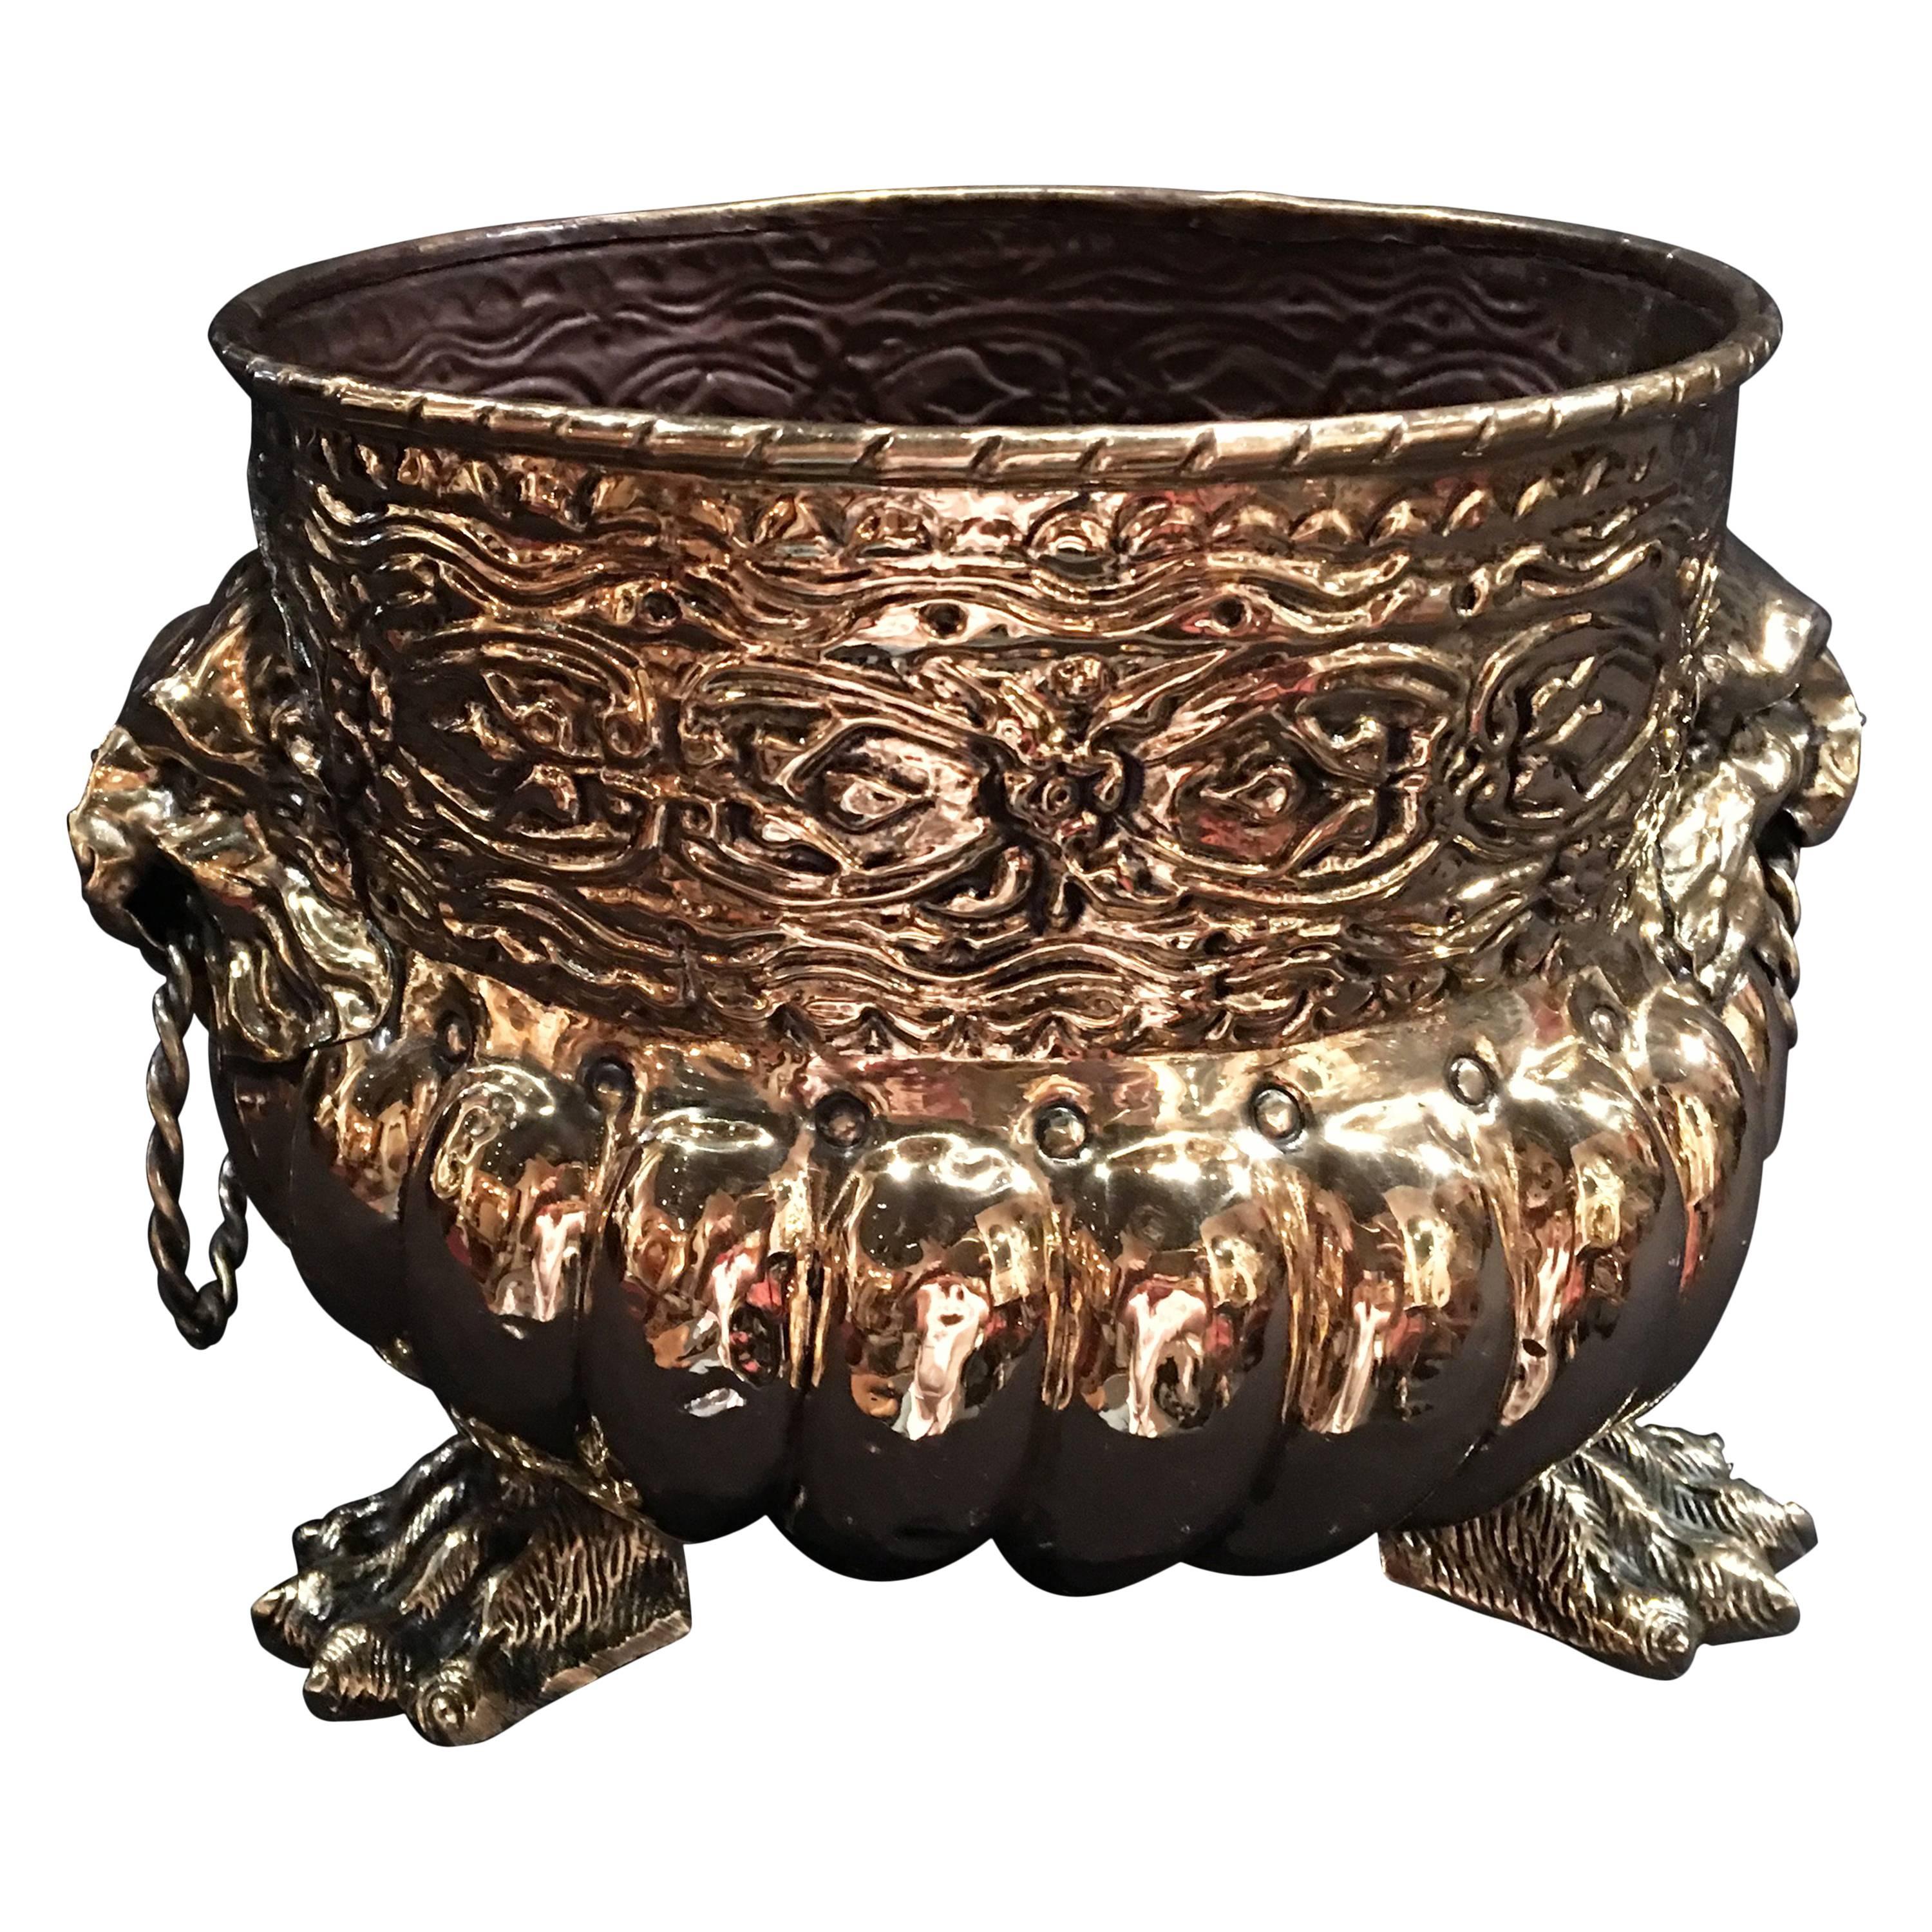 French Polished Brass Round Jardinière or Planter, 19th Century